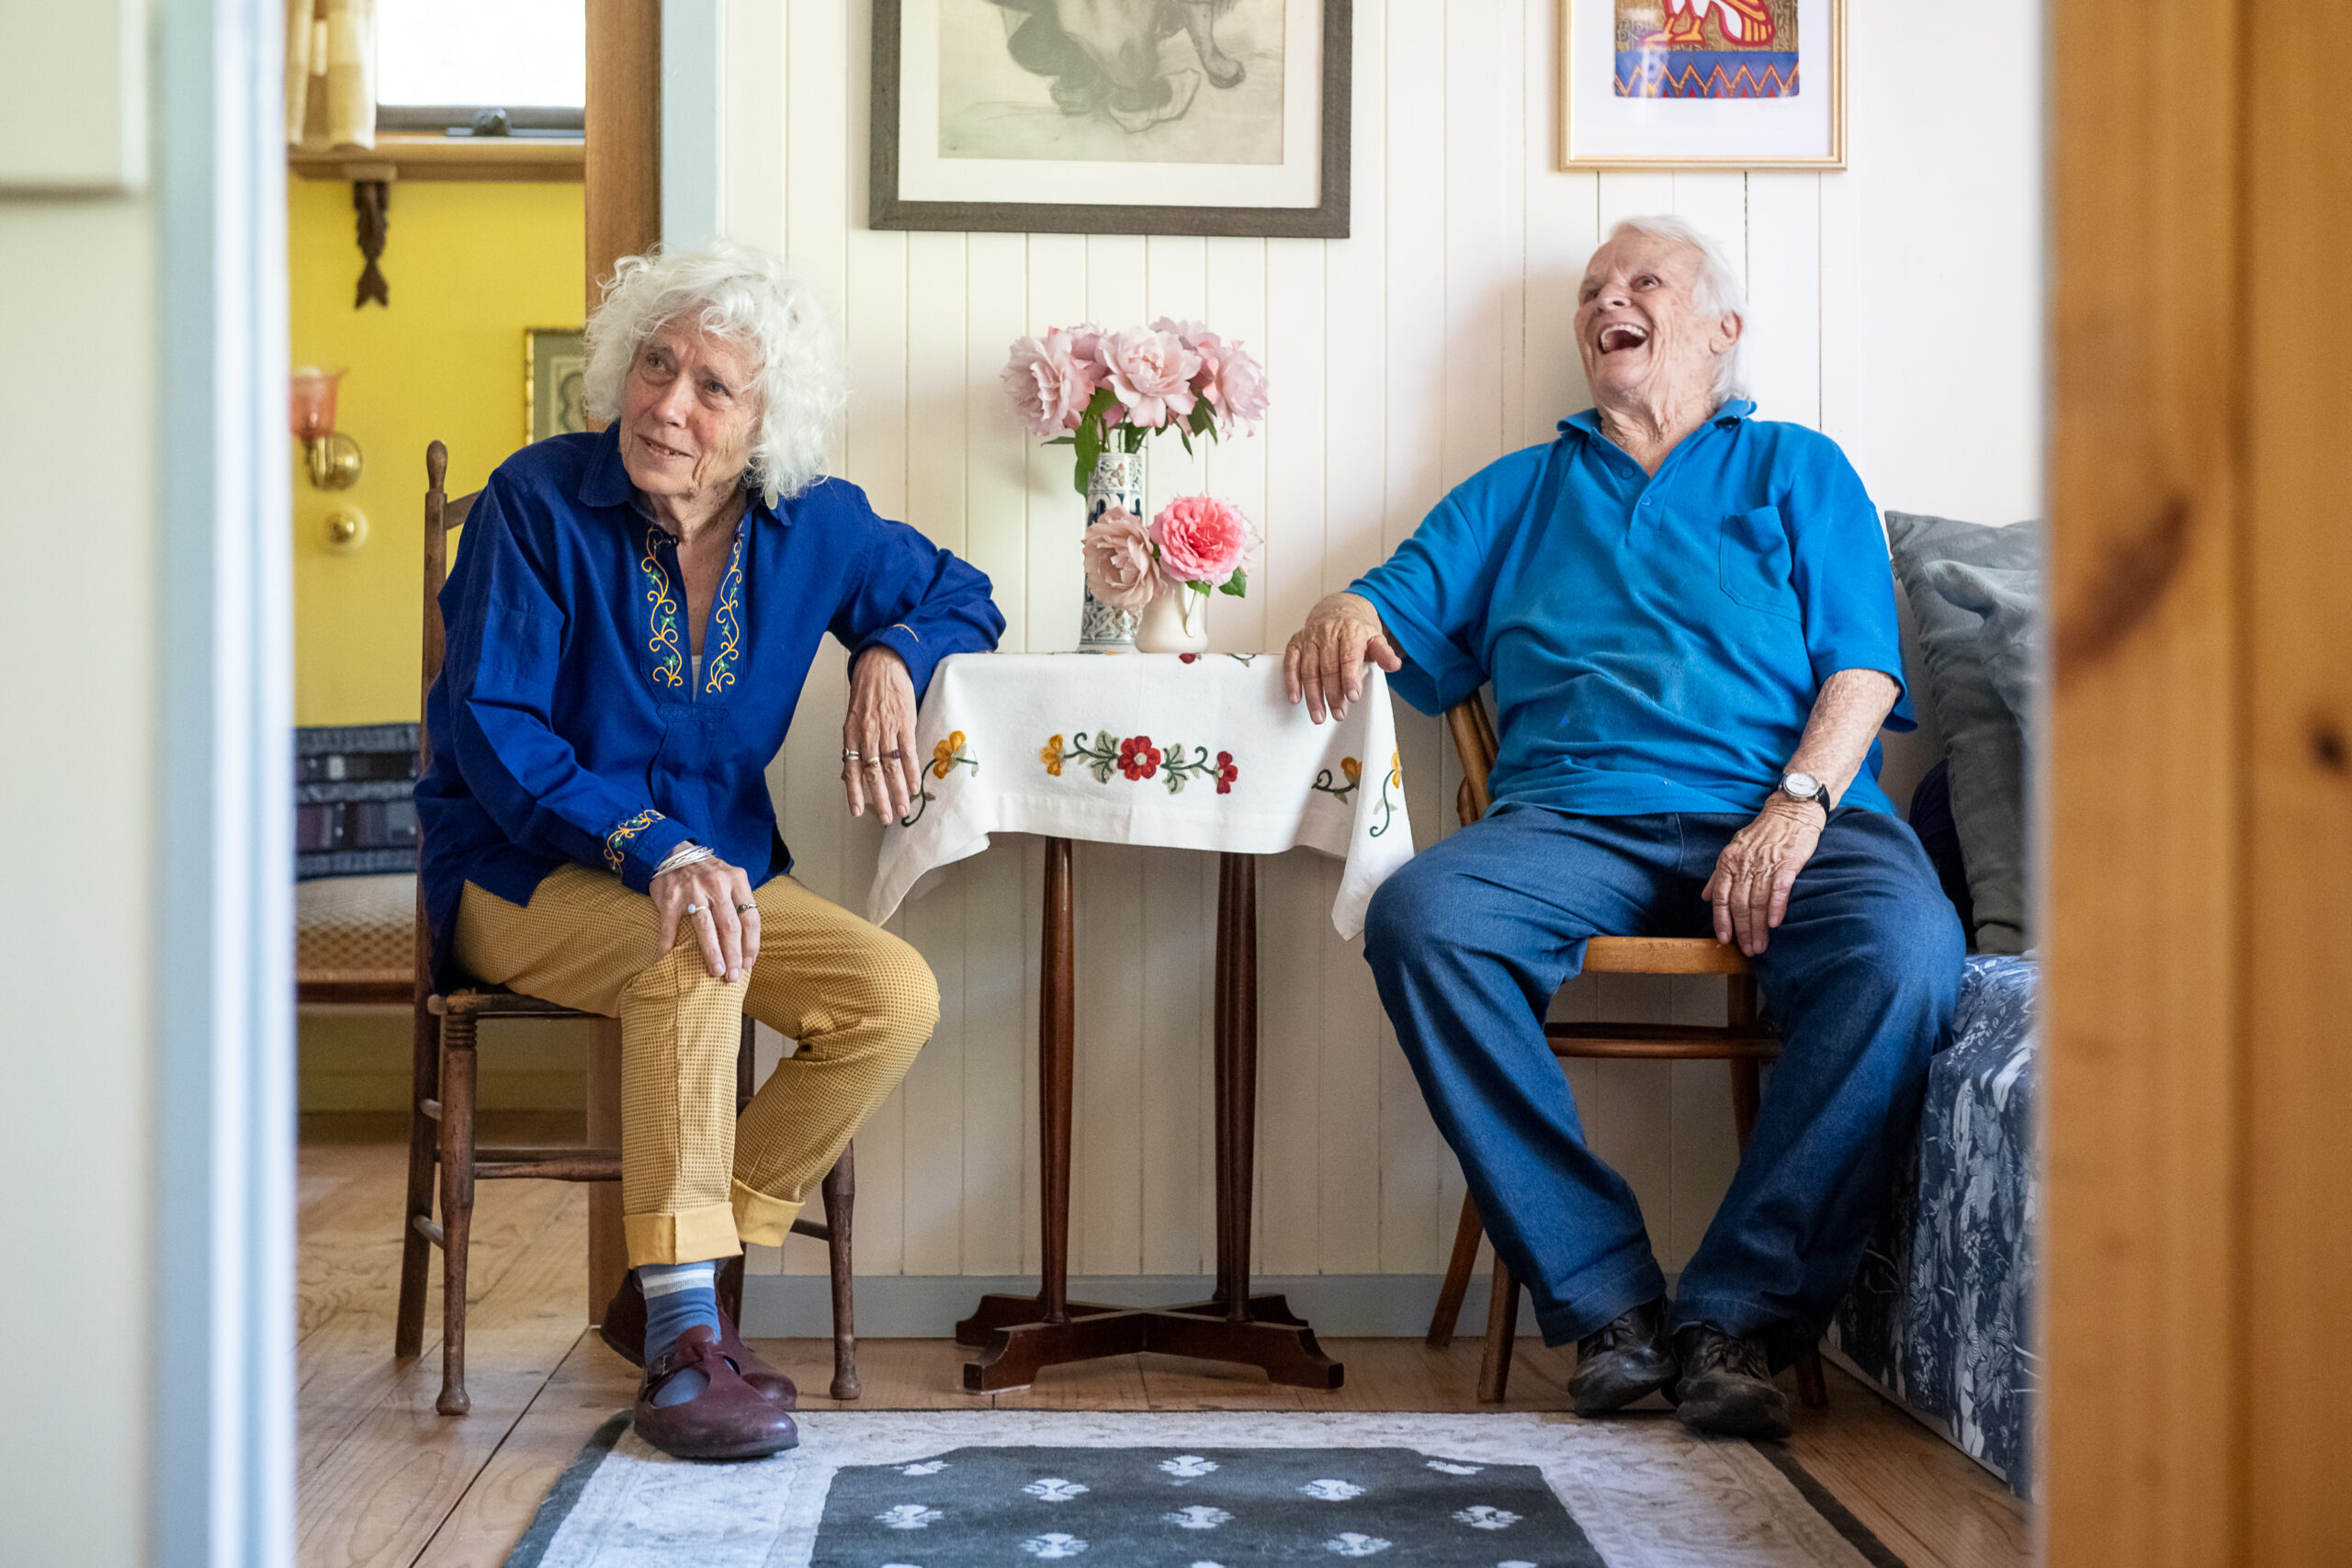 Two older people sit at a table together, smiling.